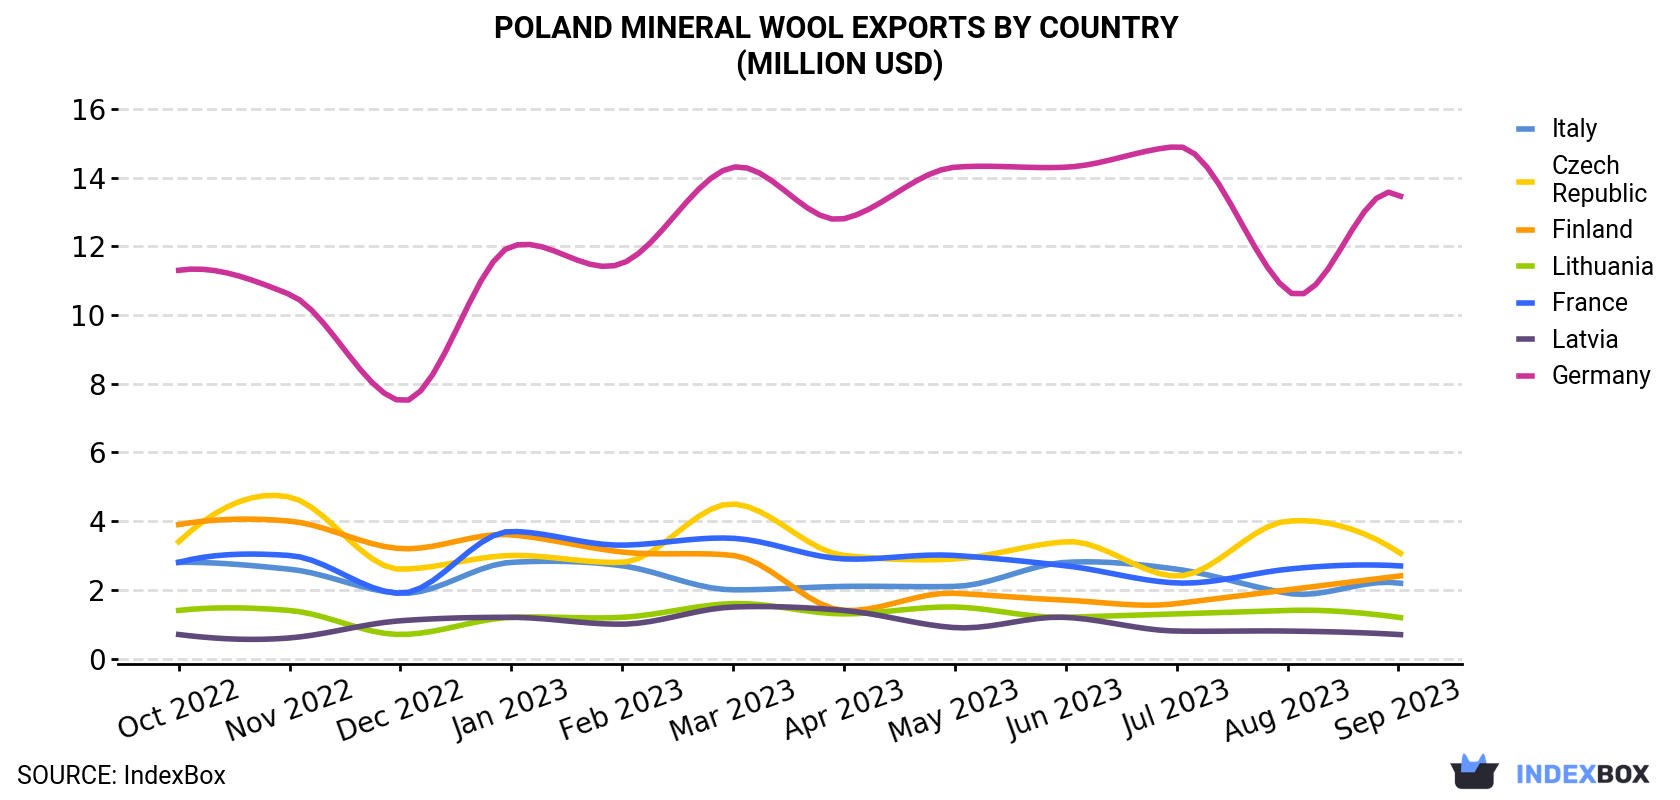 Poland Mineral Wool Exports By Country (Million USD)